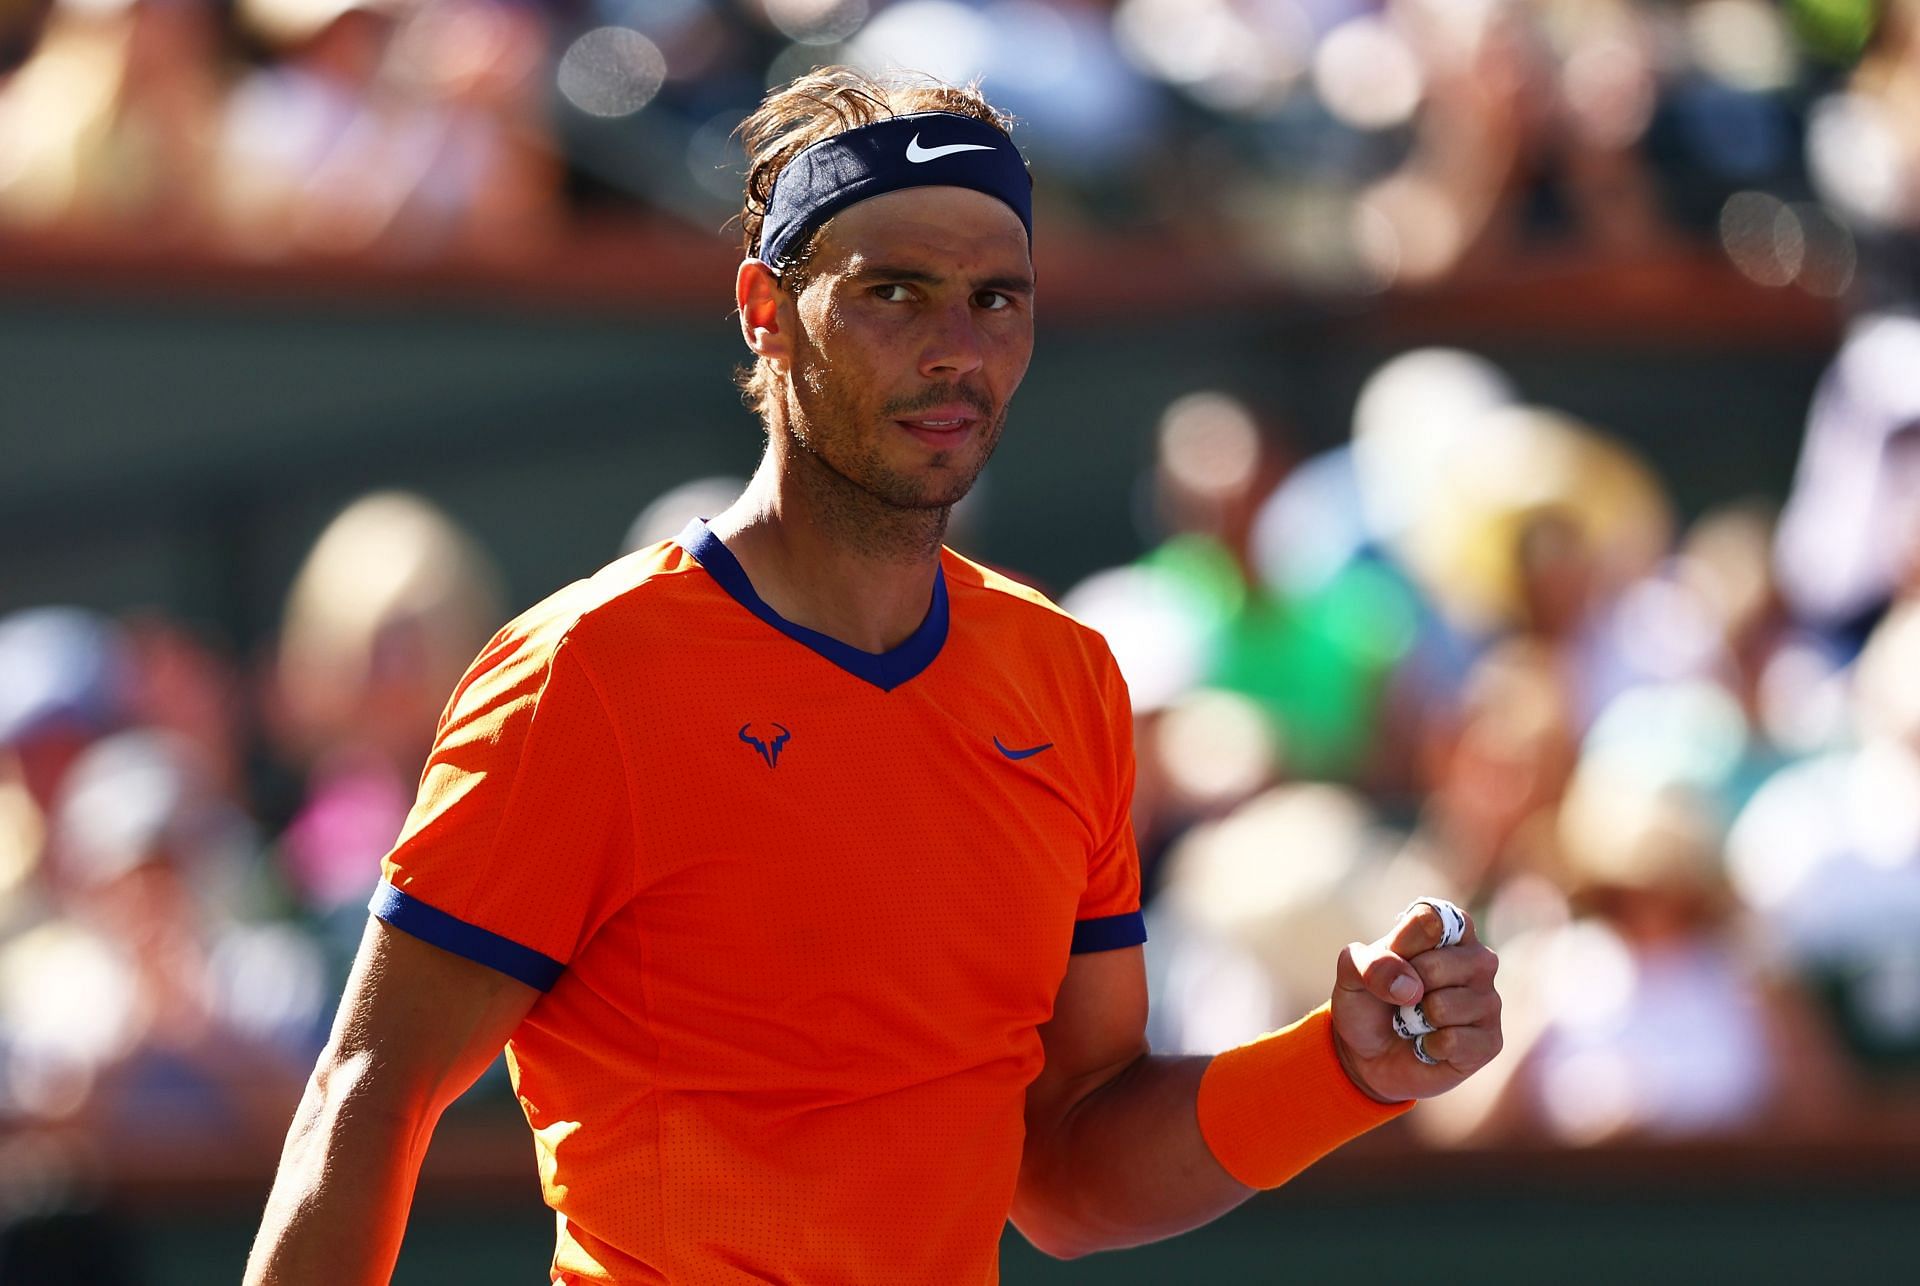 Rafael Nadal has reached the semifinals of the Indian Wells Masters for the 11th time